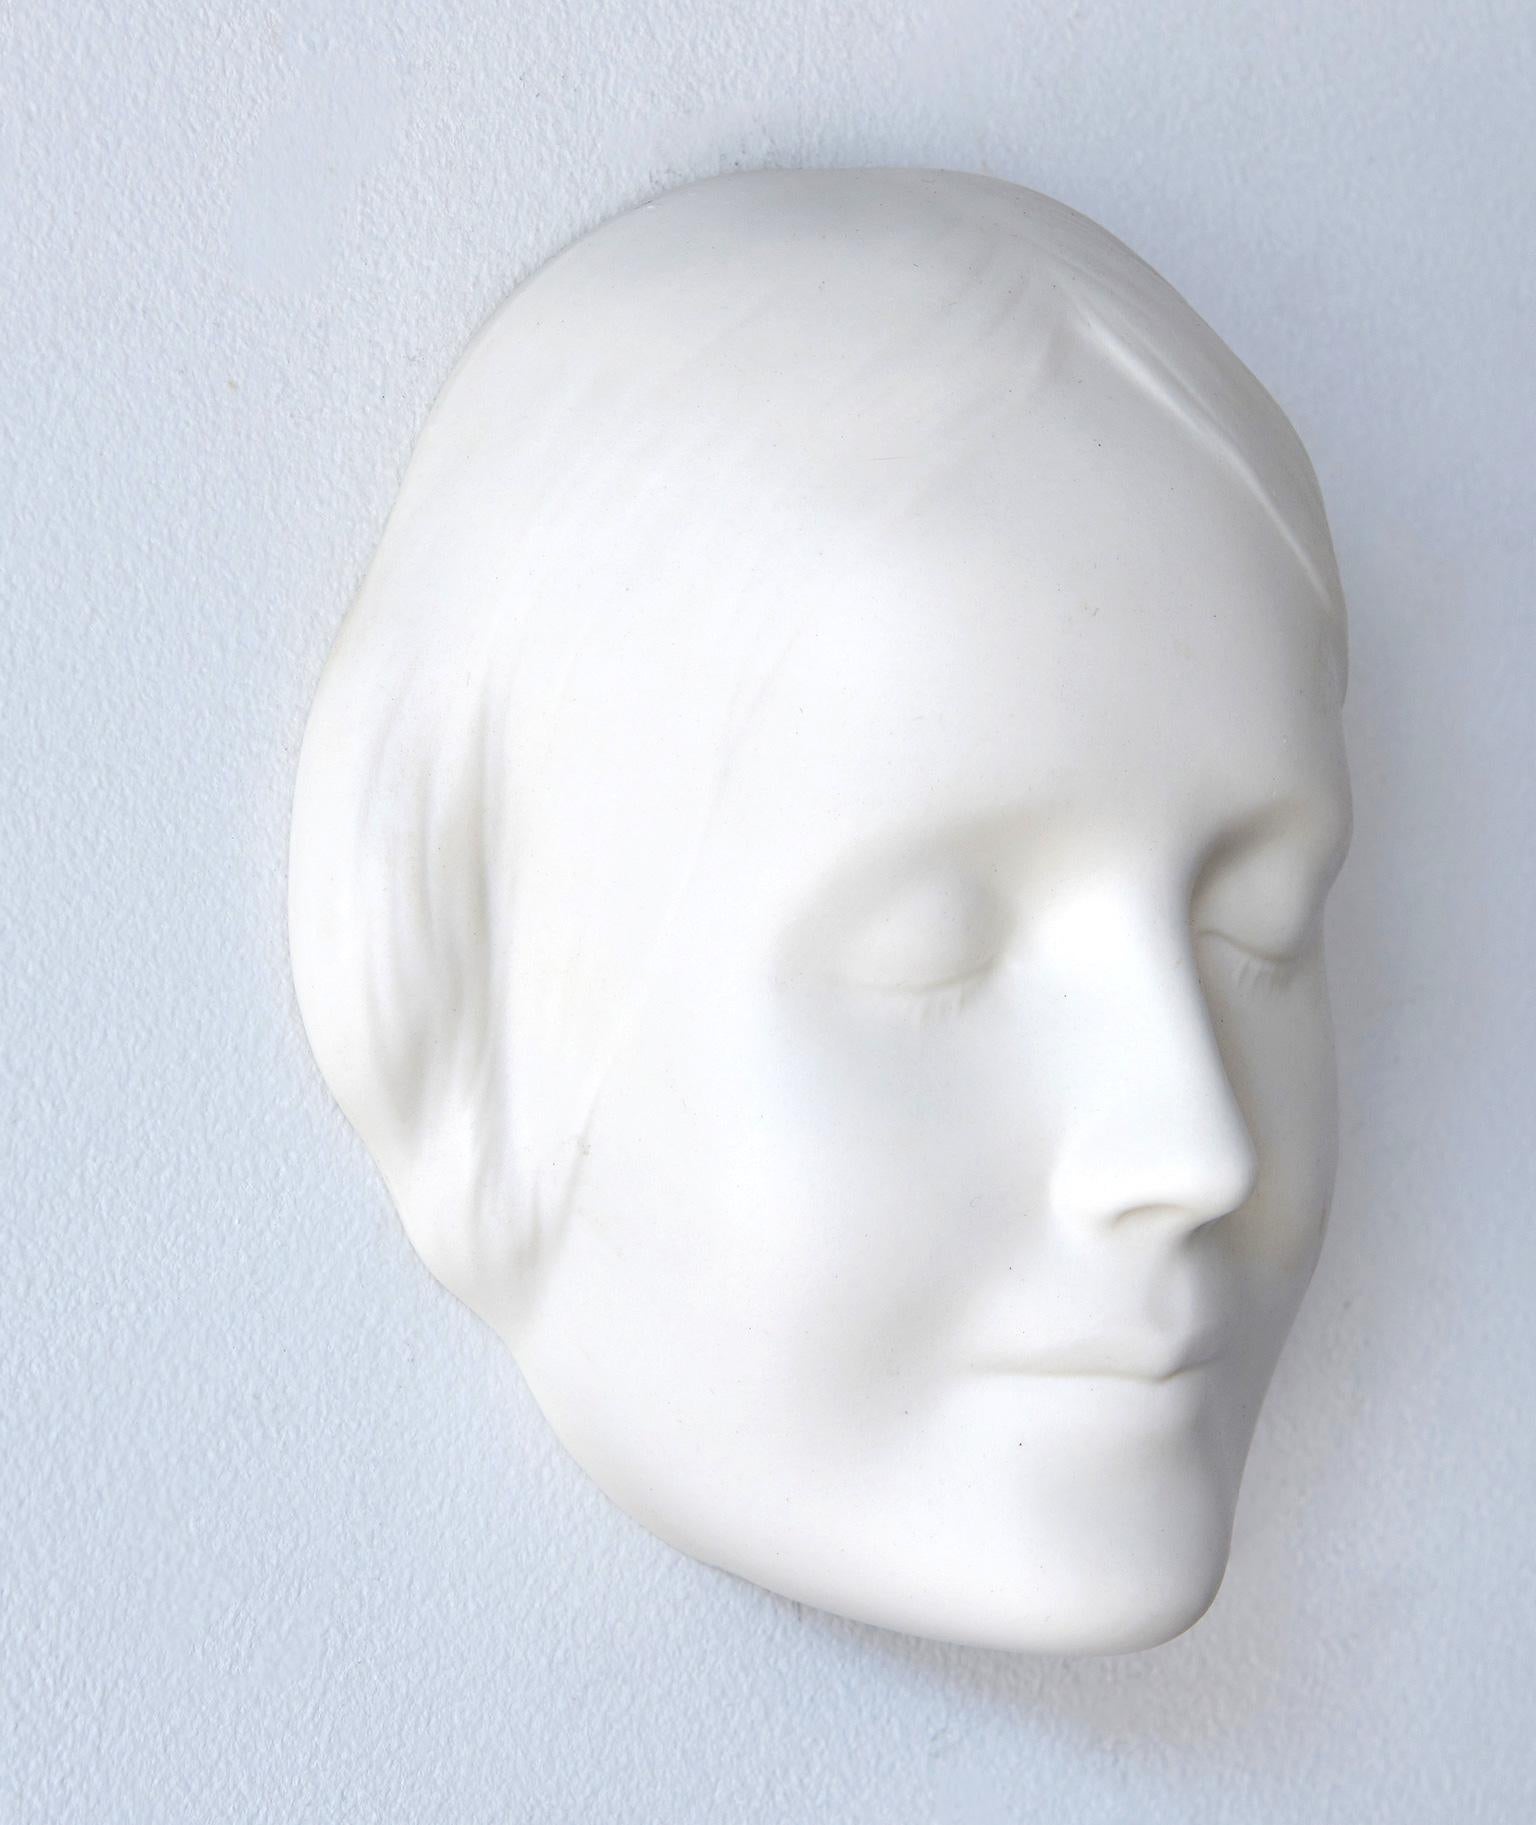 This bisque porcelain wall mask is of an anonymous woman who, in the 1880s, committed suicide by drowning by jumping into the Seine river in Paris. Her identity was never discovered, but her enigmatic facial expression and innocent, peaceful beauty